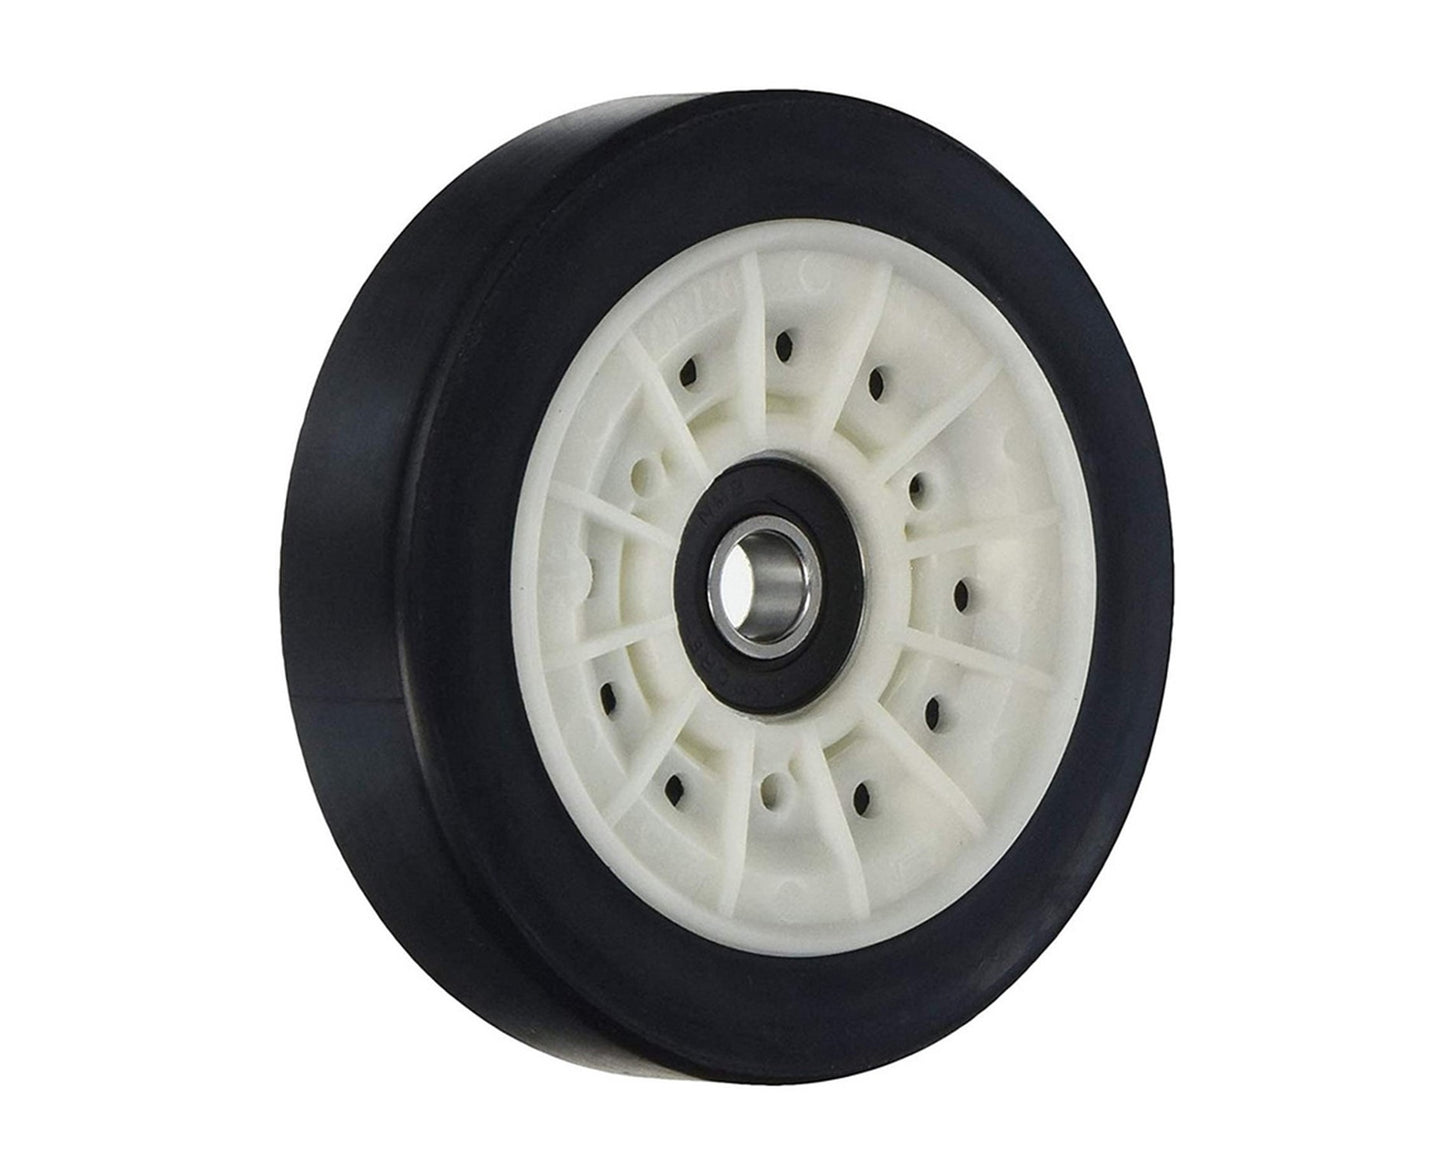 Drum Support Pulley Wheel for Beko Tumble Dryers 75mm - 2969900200, 2987300200, ES1662044, ES1884027